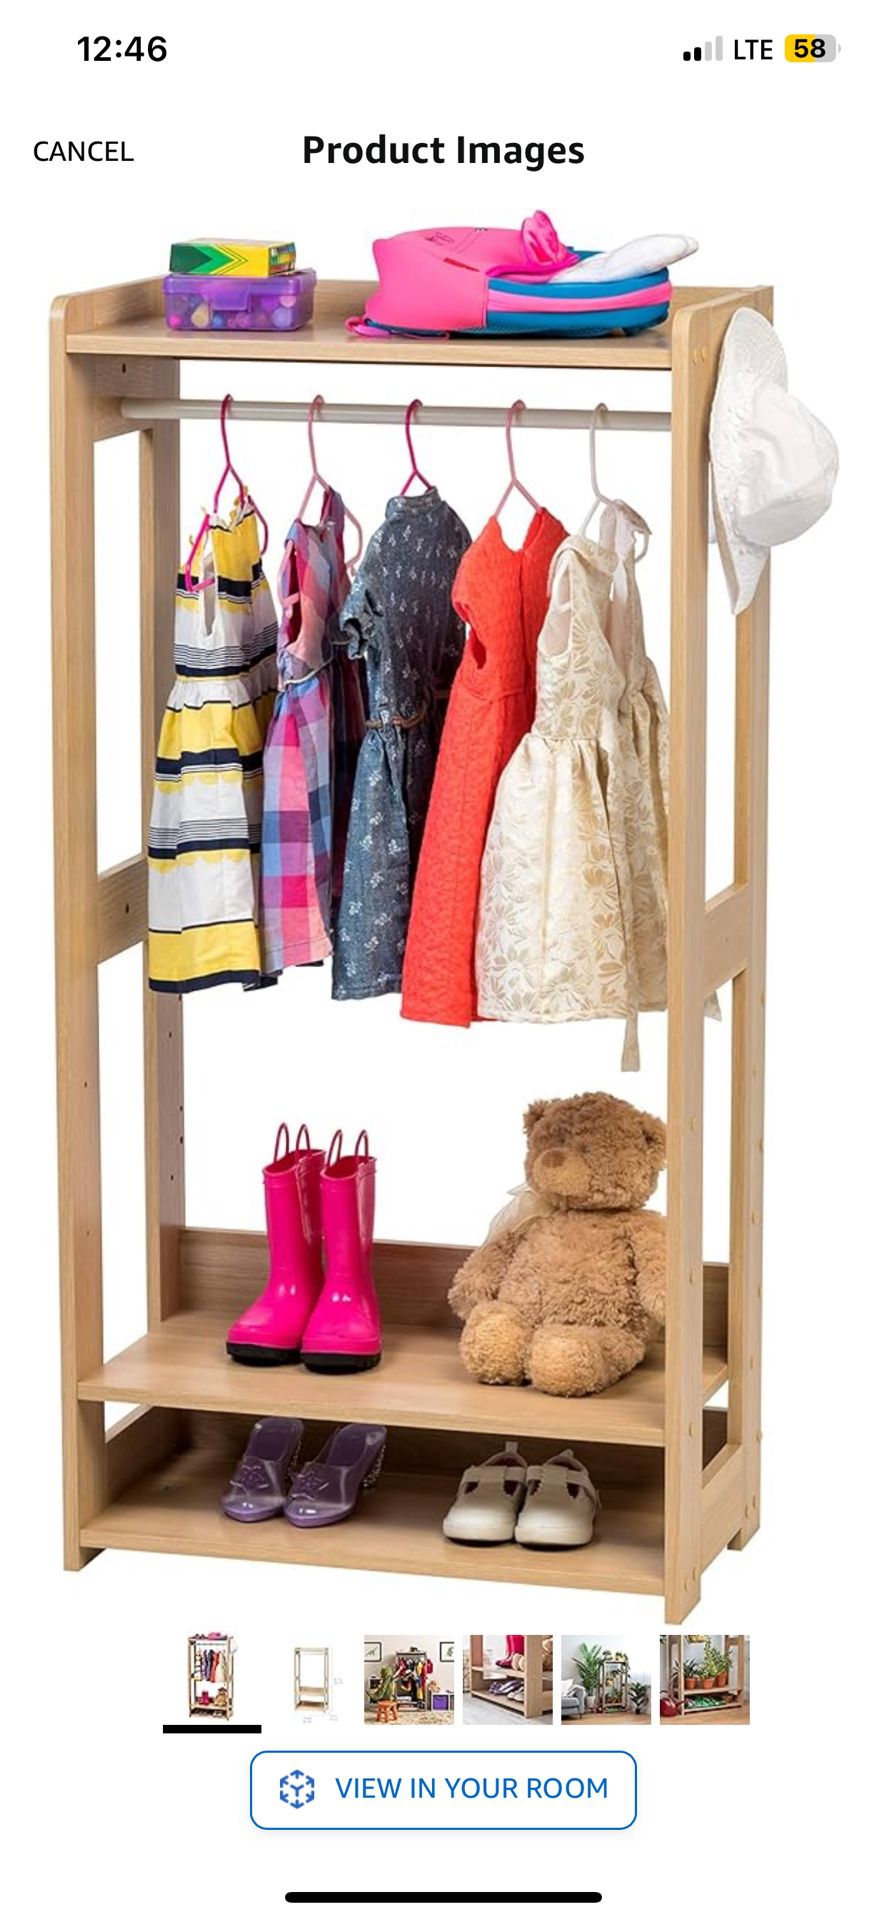 IRIS USA Open Wood Clothing Costume Garment Hanging Rack Armoire Wardrobe Dresser Organizer with Shoe Shelves and Side Hook, for Nursery, Kids Room, C